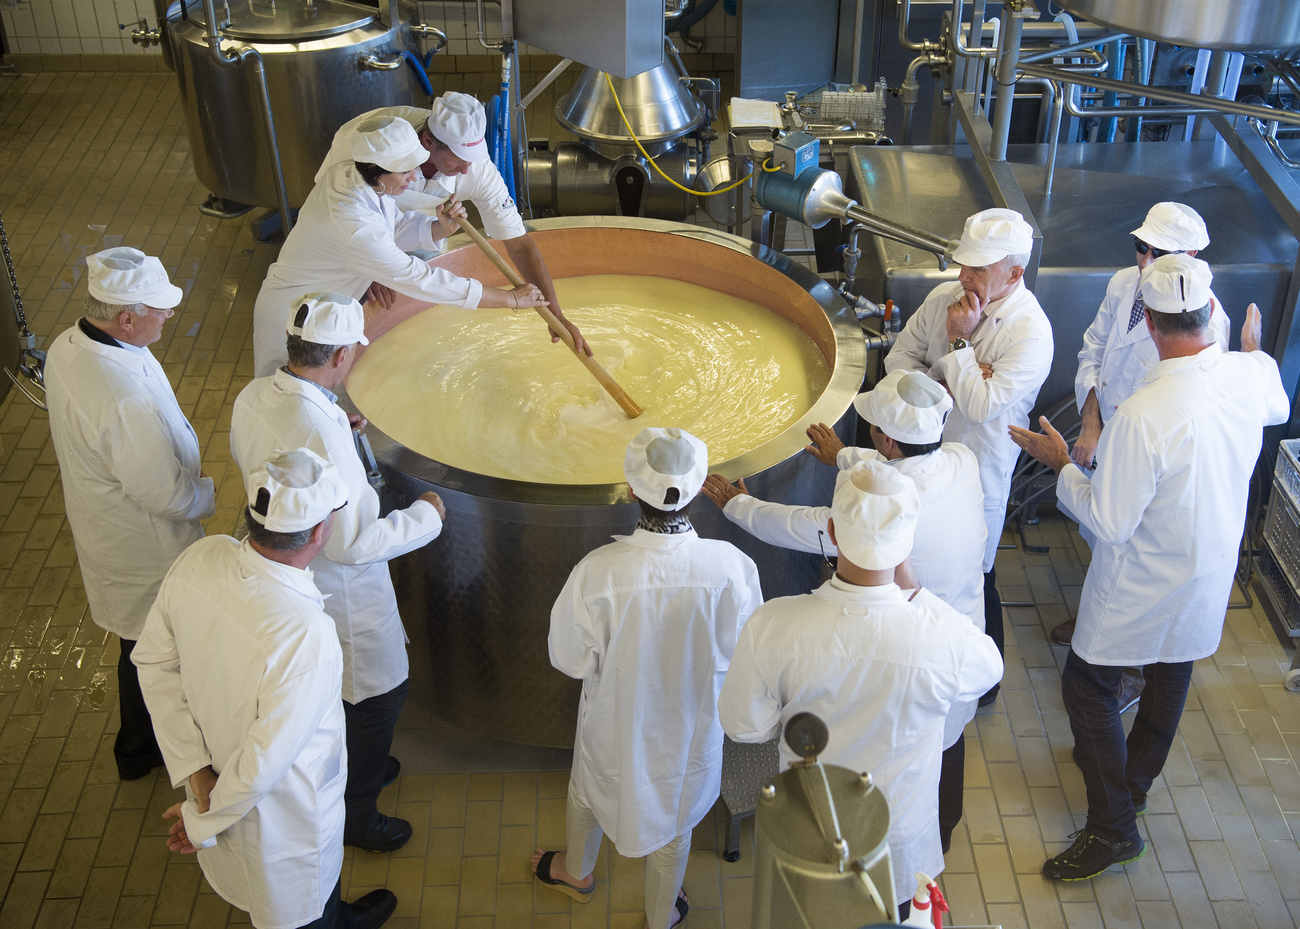 Members of the Swiss Federal Council visit a traditional cheesemaker in Affoltern in Emmental in 2016.